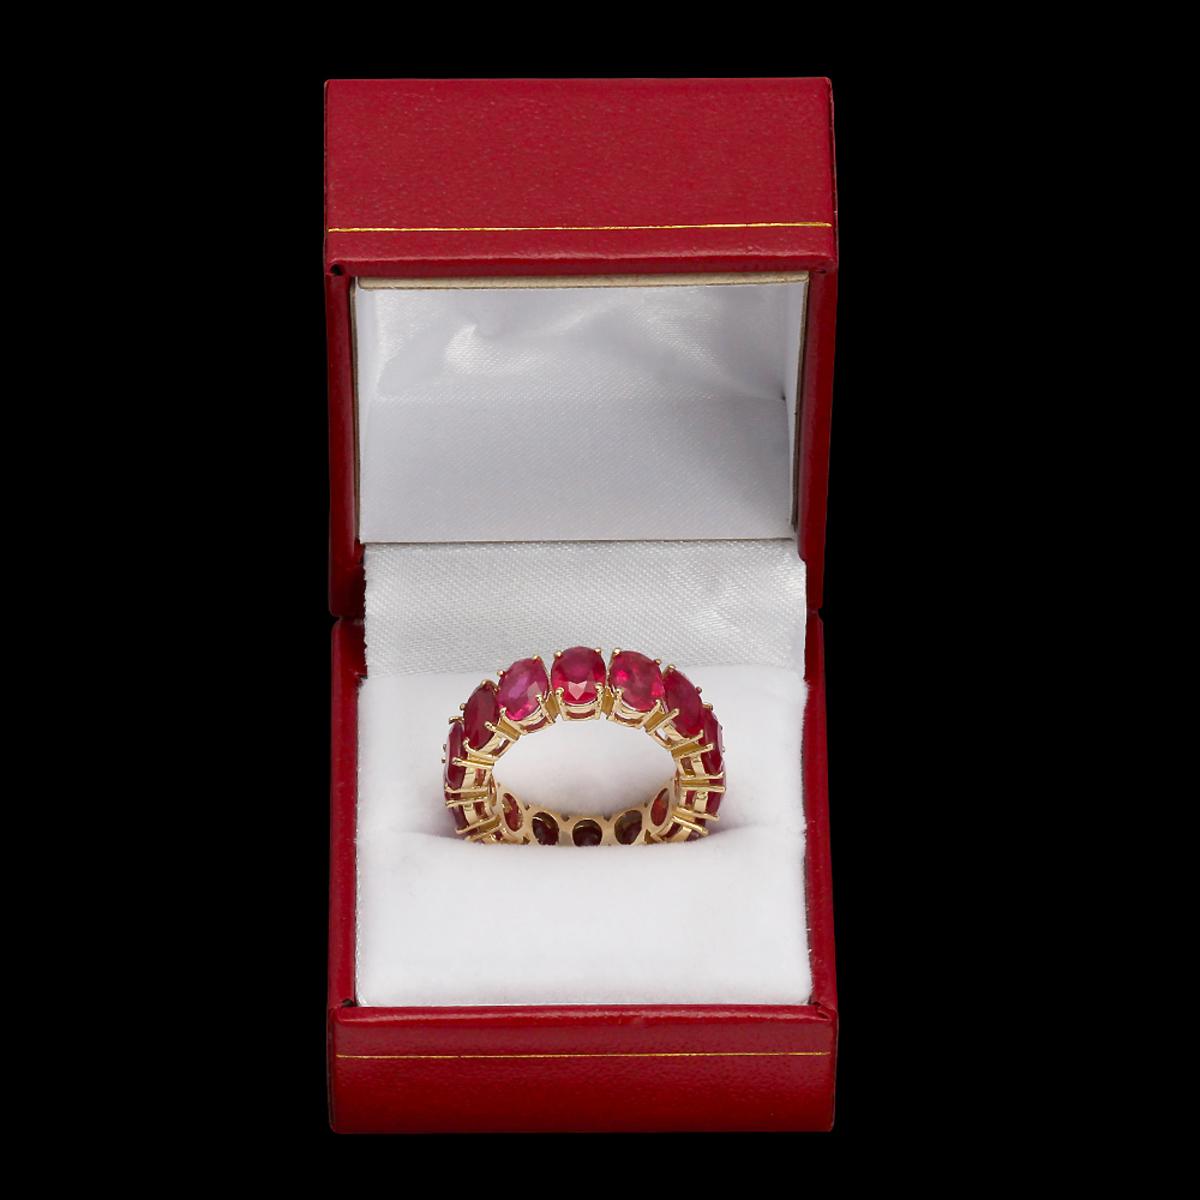 14K Yellow Gold 11.26ct Ruby Eternity Band Ring